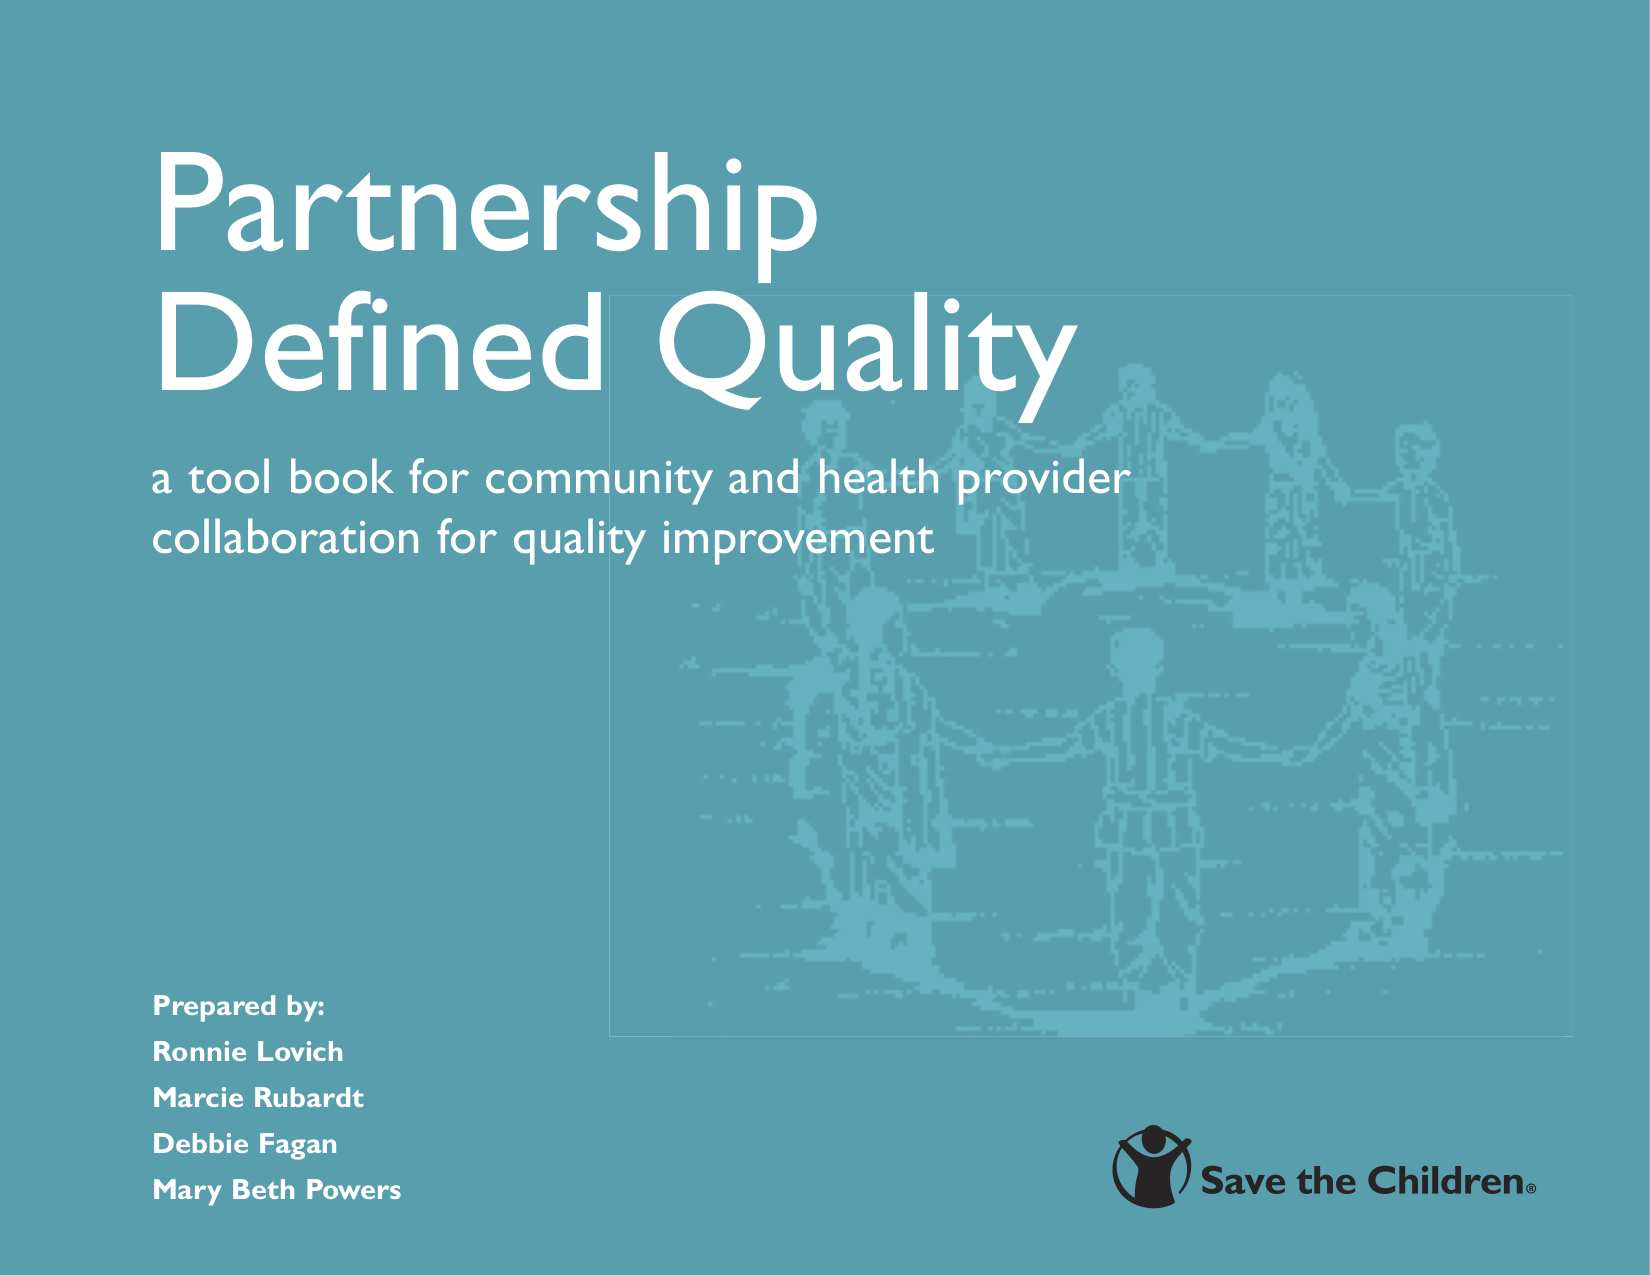 Partnership Defined Quality: a tool book for community and health provider collaboration for quality improvement